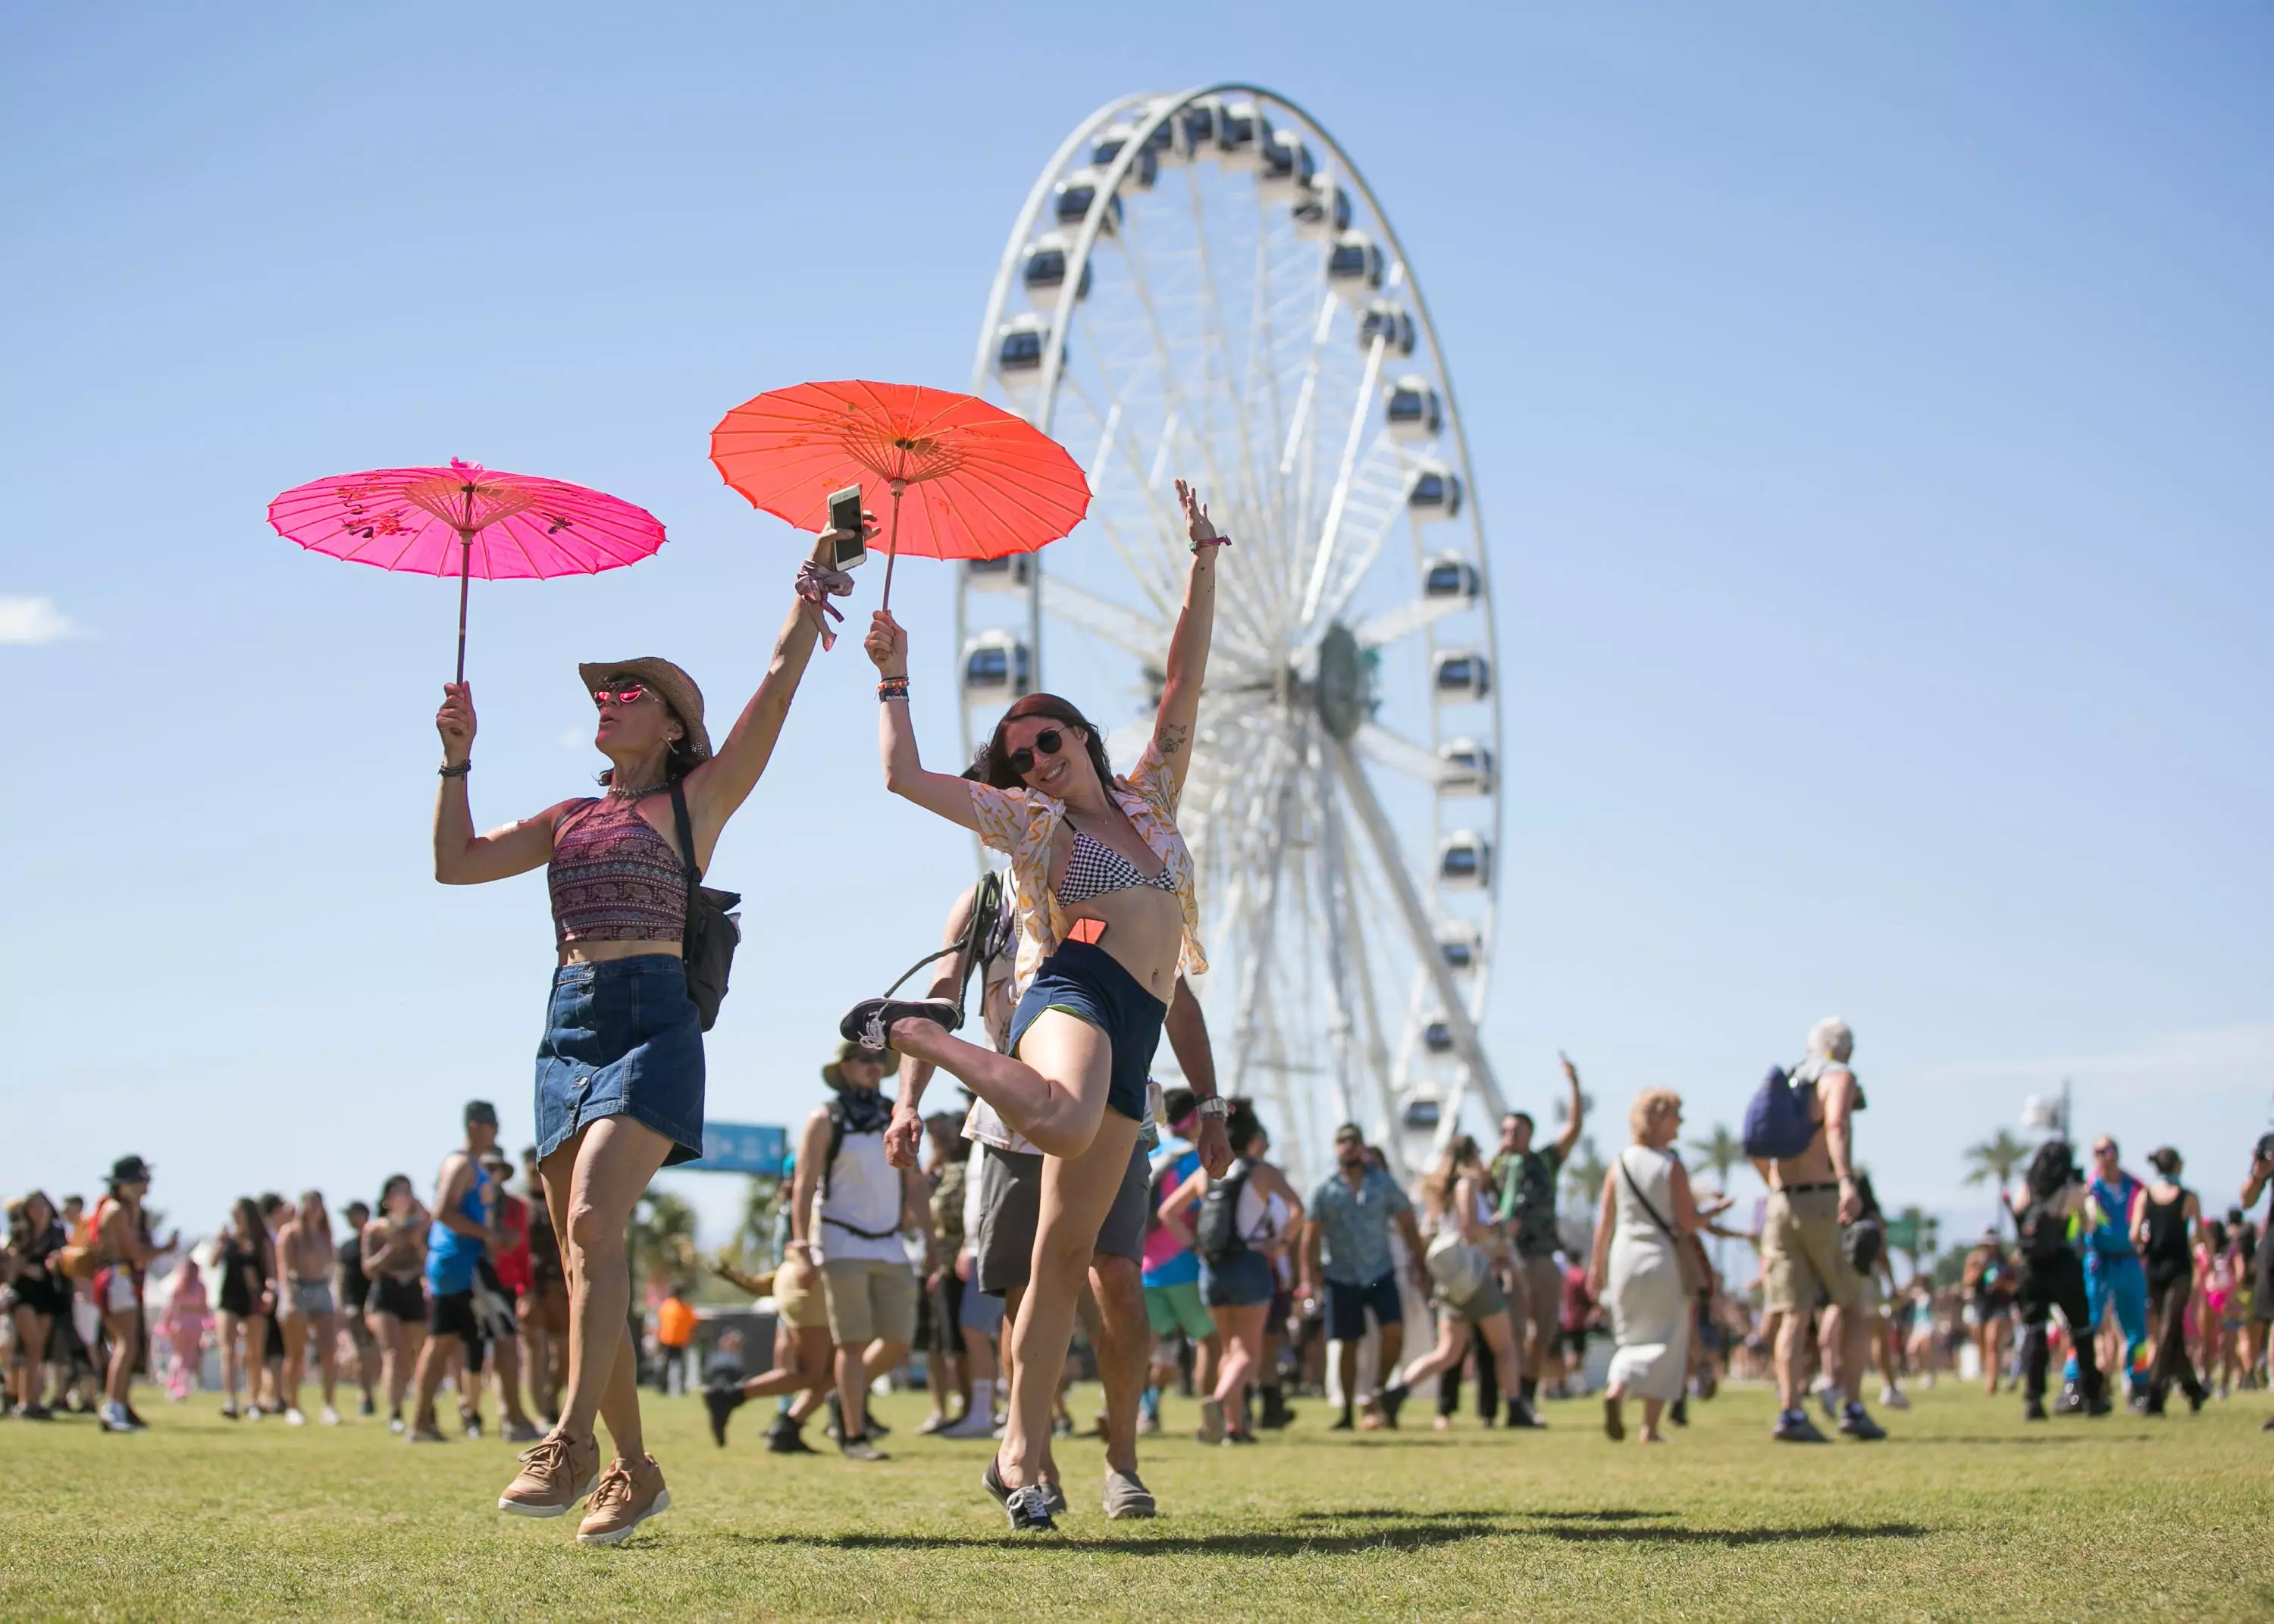 This year's Coachella has been postponed until later in the year.